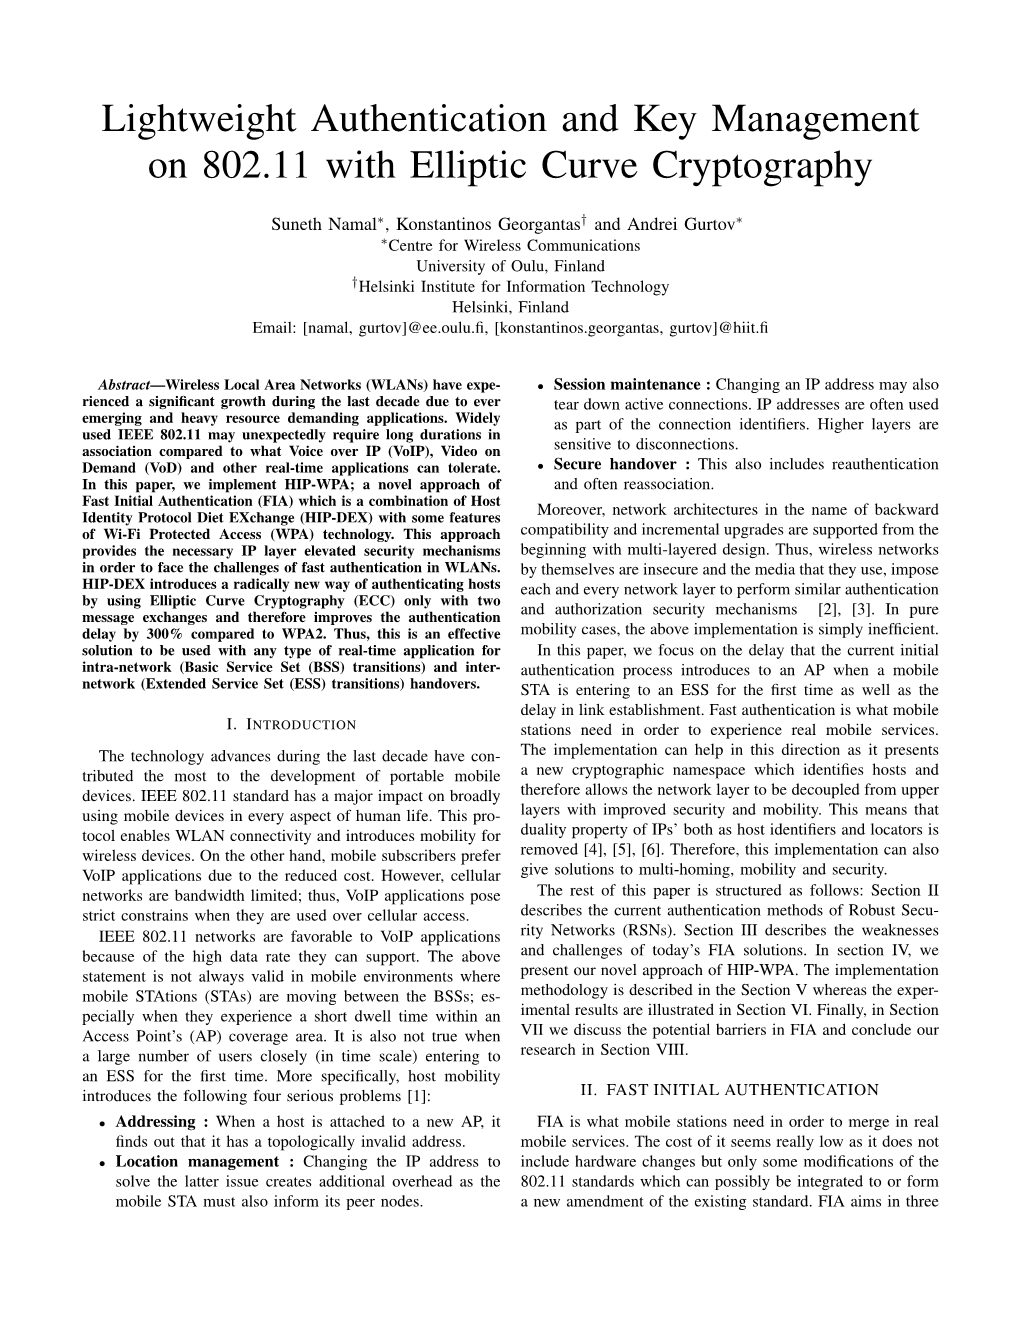 Lightweight Authentication and Key Management on 802.11 with Elliptic Curve Cryptography